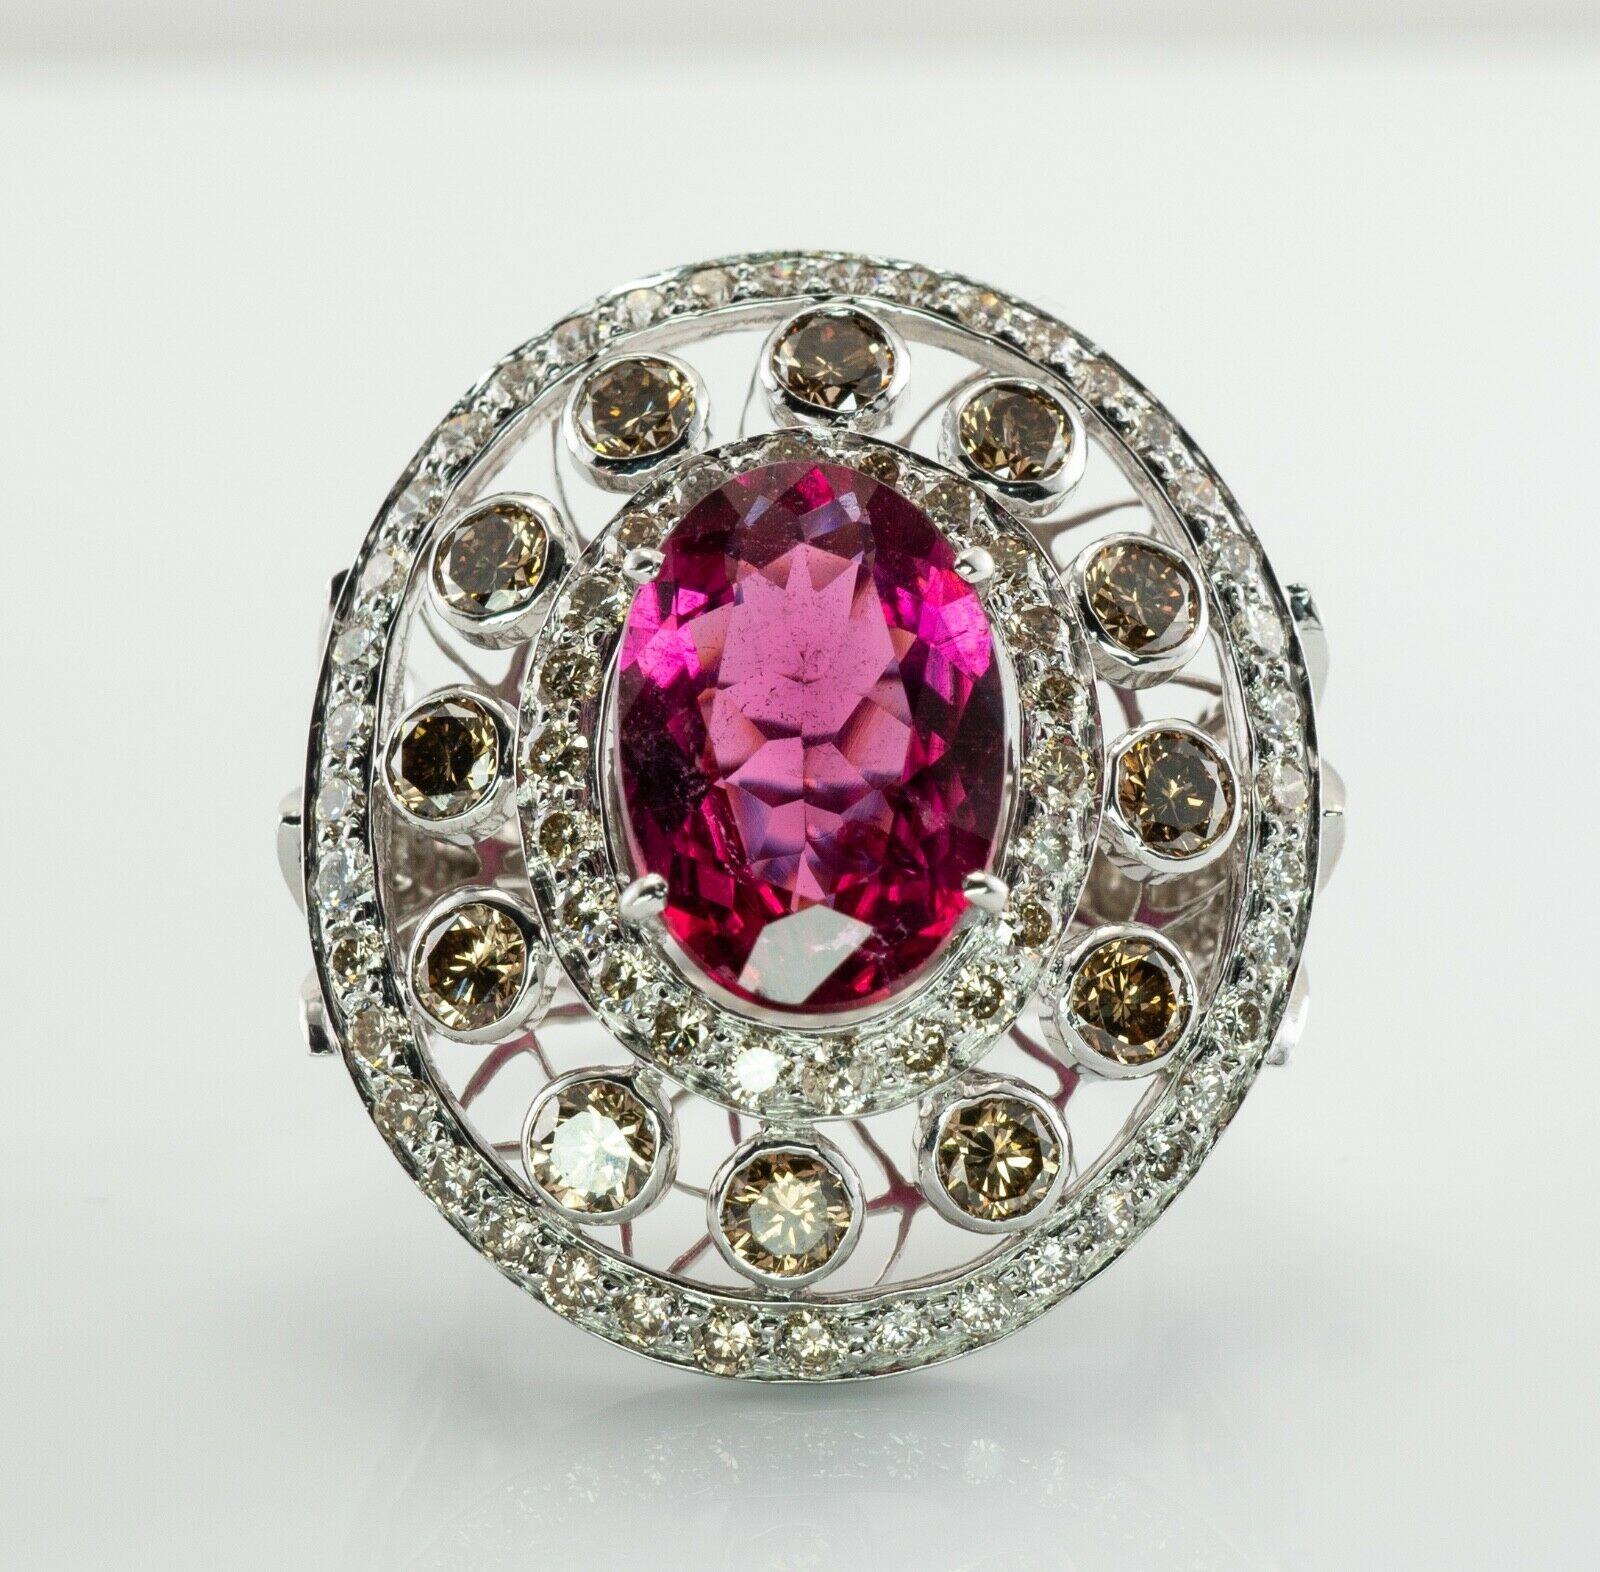 This vintage ring is finely crafted in solid 18K White gold. The center genuine Earth mined Pink Tourmaline Rubellite measures 13mm x 10mm and estimated to be 5.51 carats. This is a very good quality gem of great intensity and strong brilliance. The